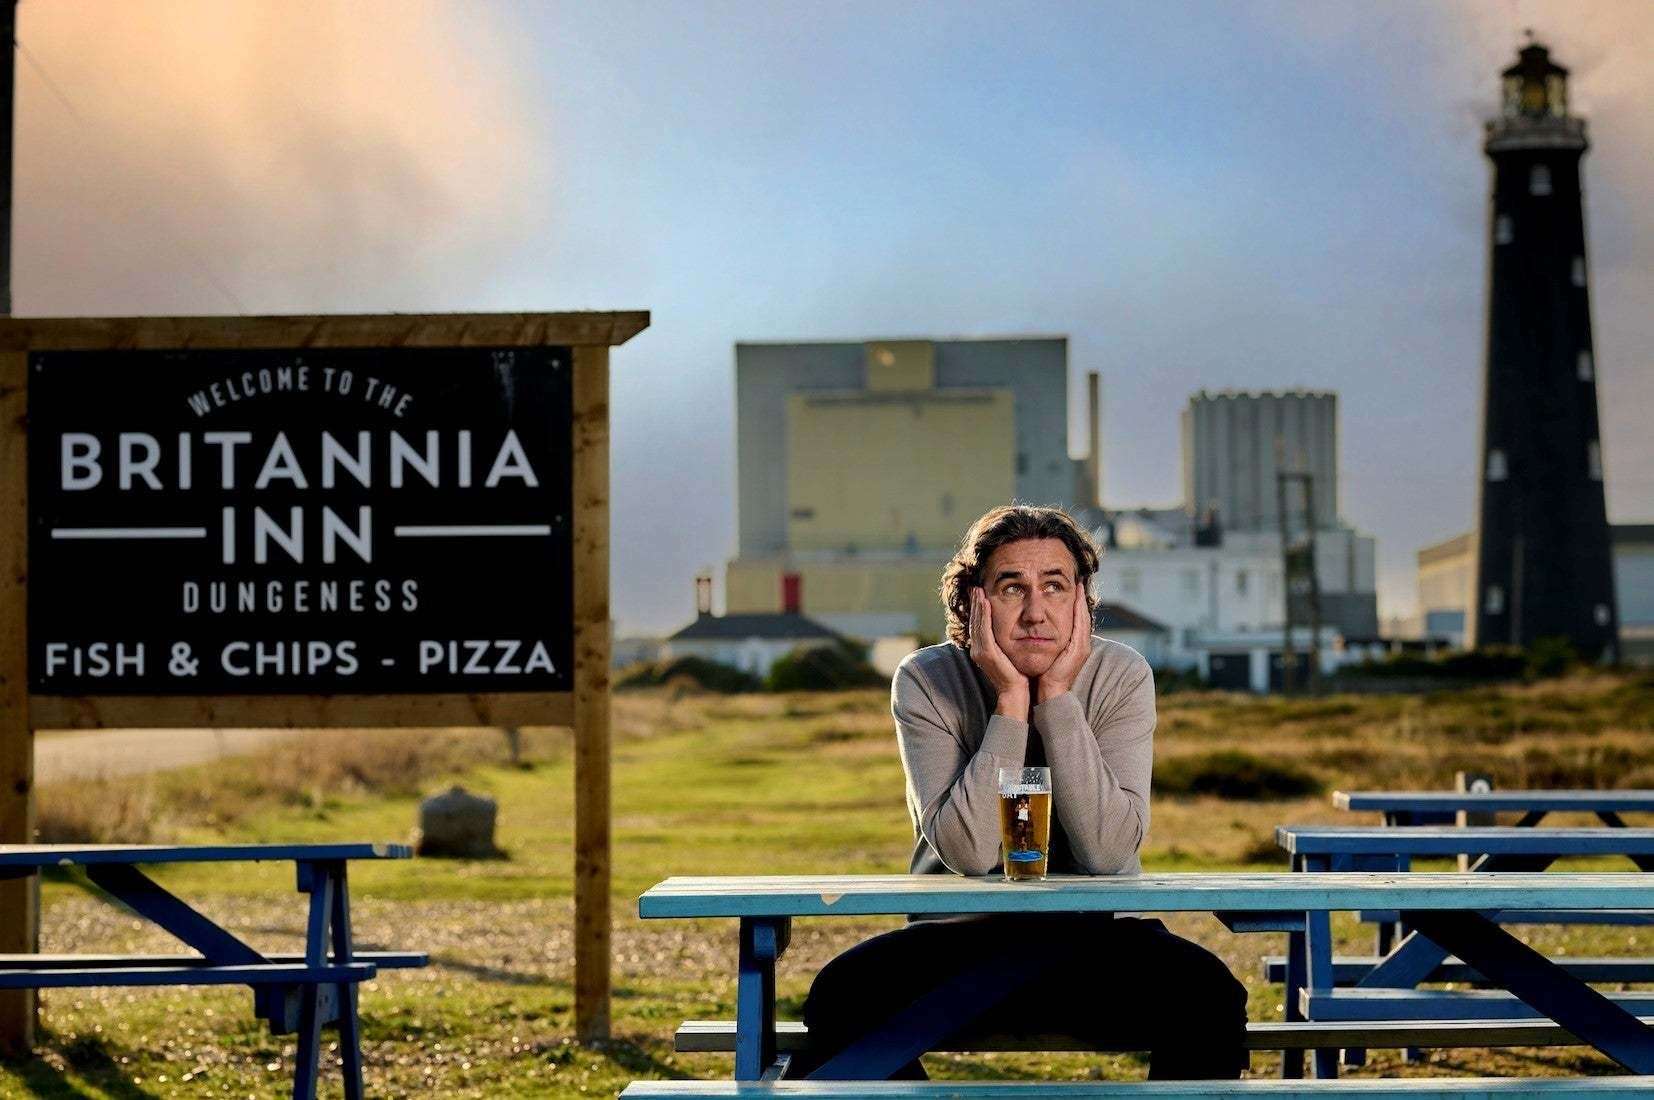 Comedian Micky Flanagan visited the Britannia Inn in Dungeness to put together some promo material for his upcoming tour